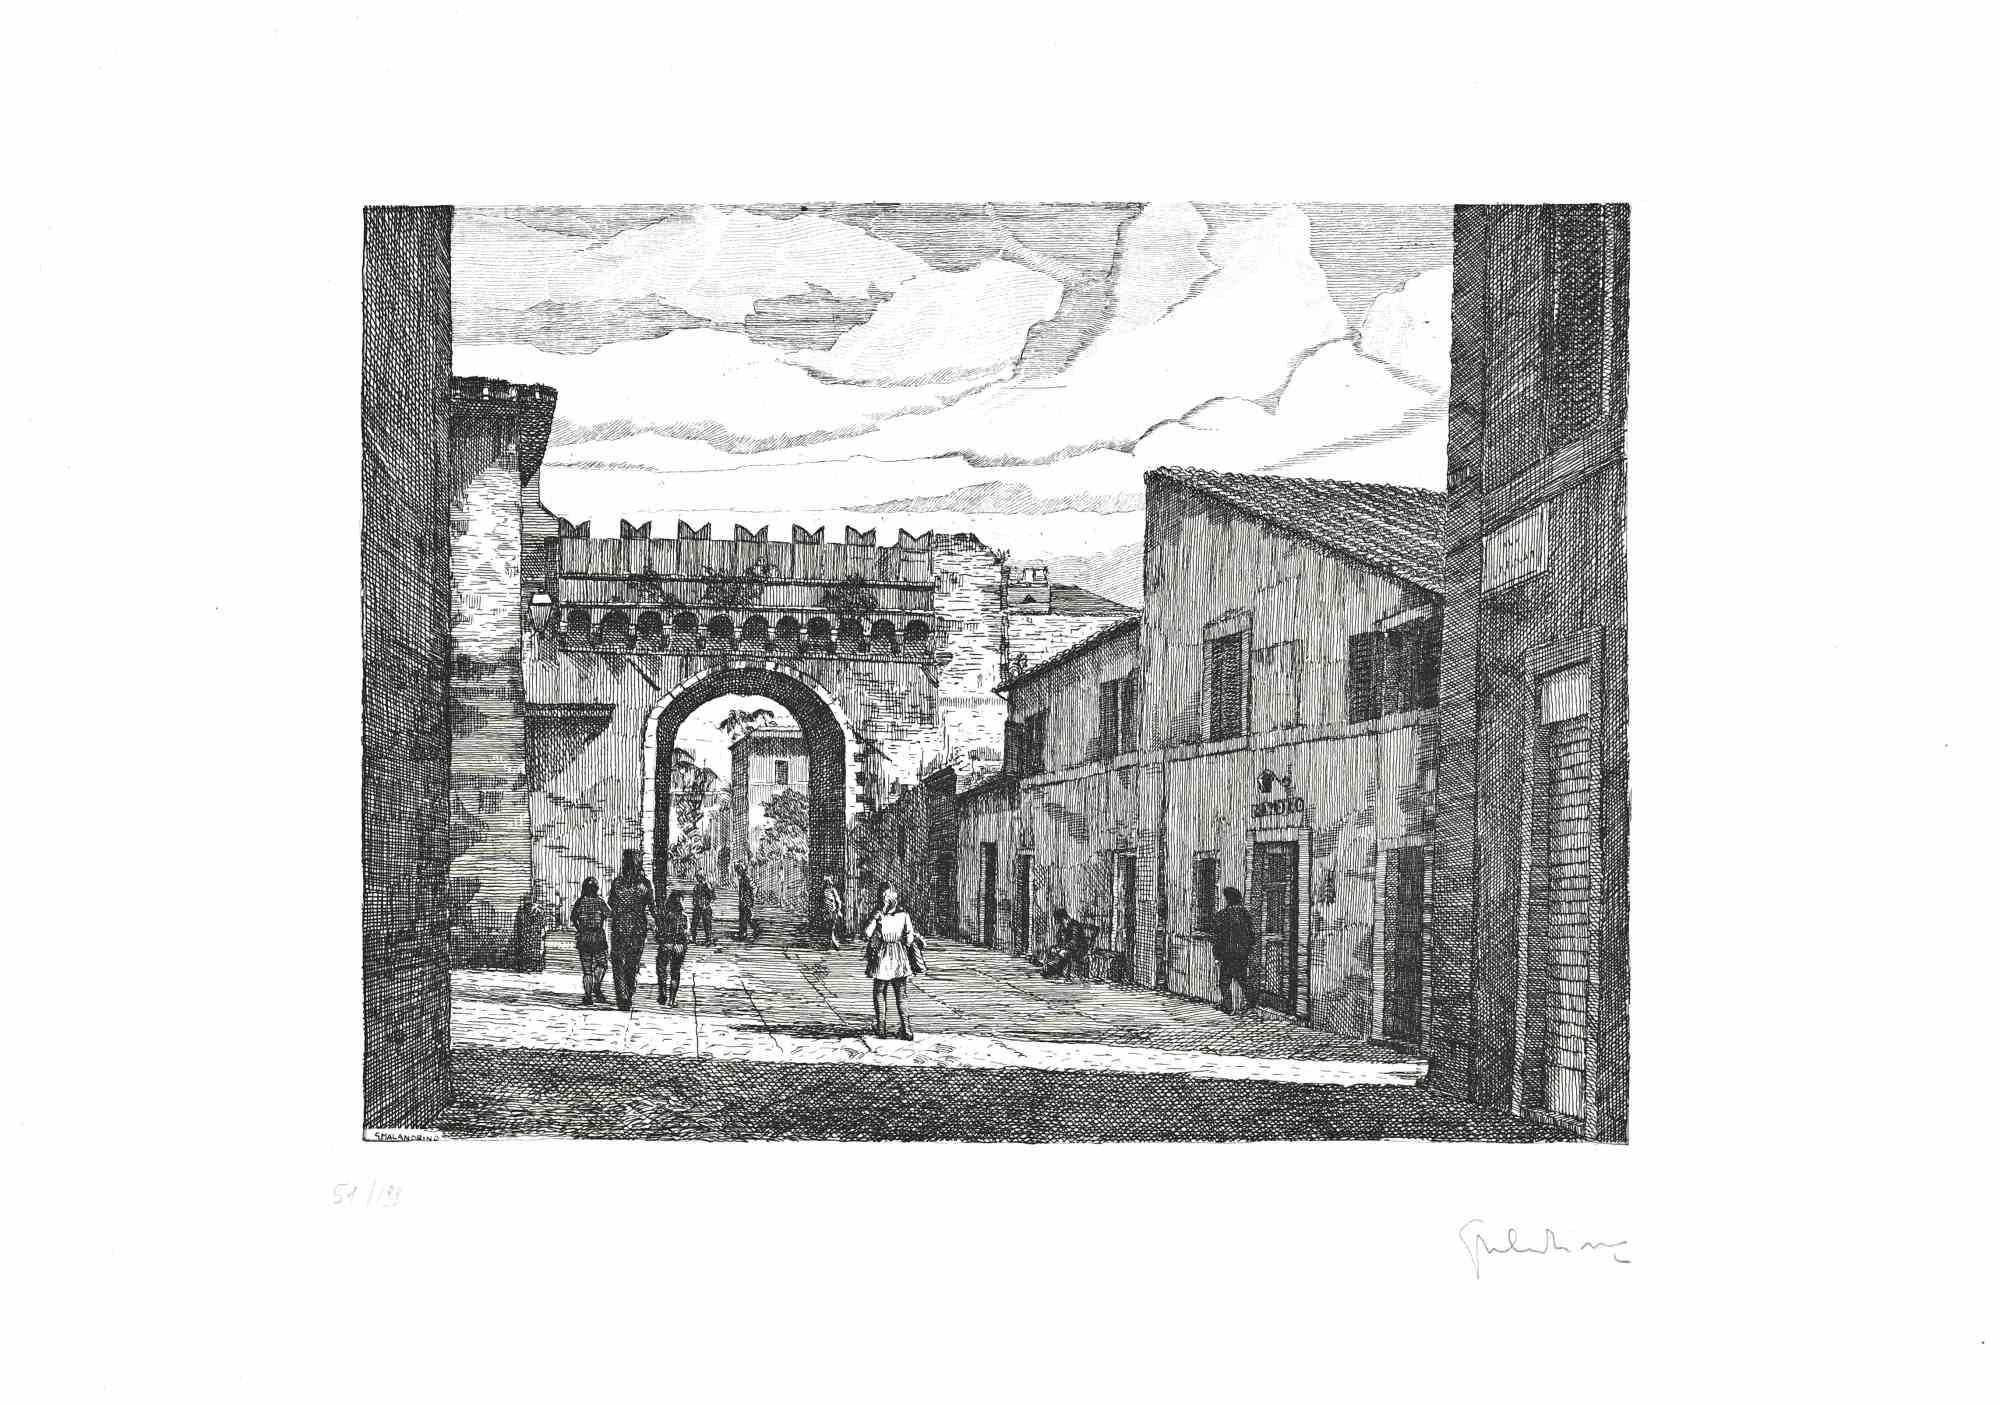 Roman View is an artwork realized by Giuseppe Malandrino.

Print in etching technique and hand watercolored.

Hand-signed by the artist in pencil on the lower right corner.

Numbered edition,51/199.

Good condition.

This artwork represents the